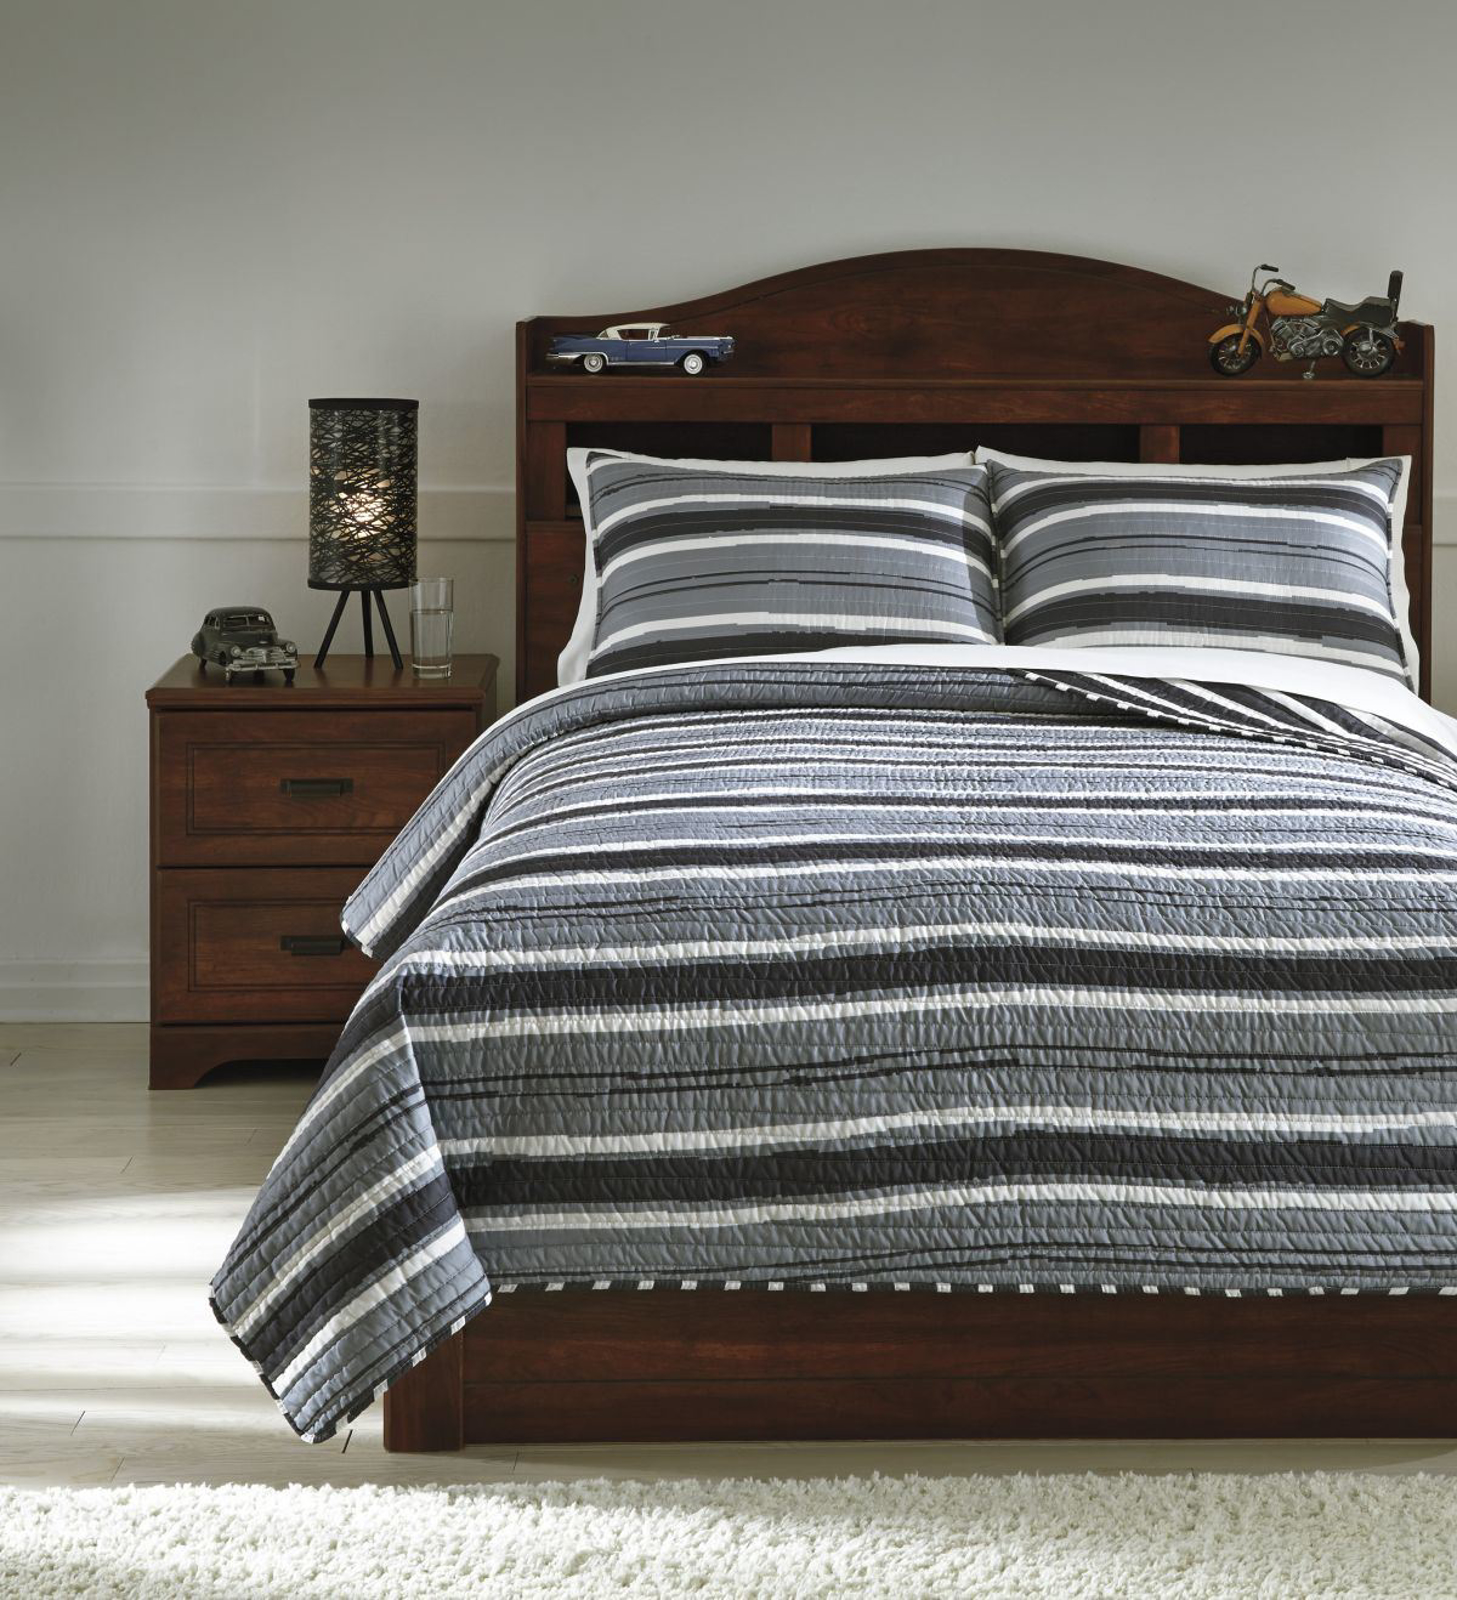 Picture of Merlin Coverlet Set